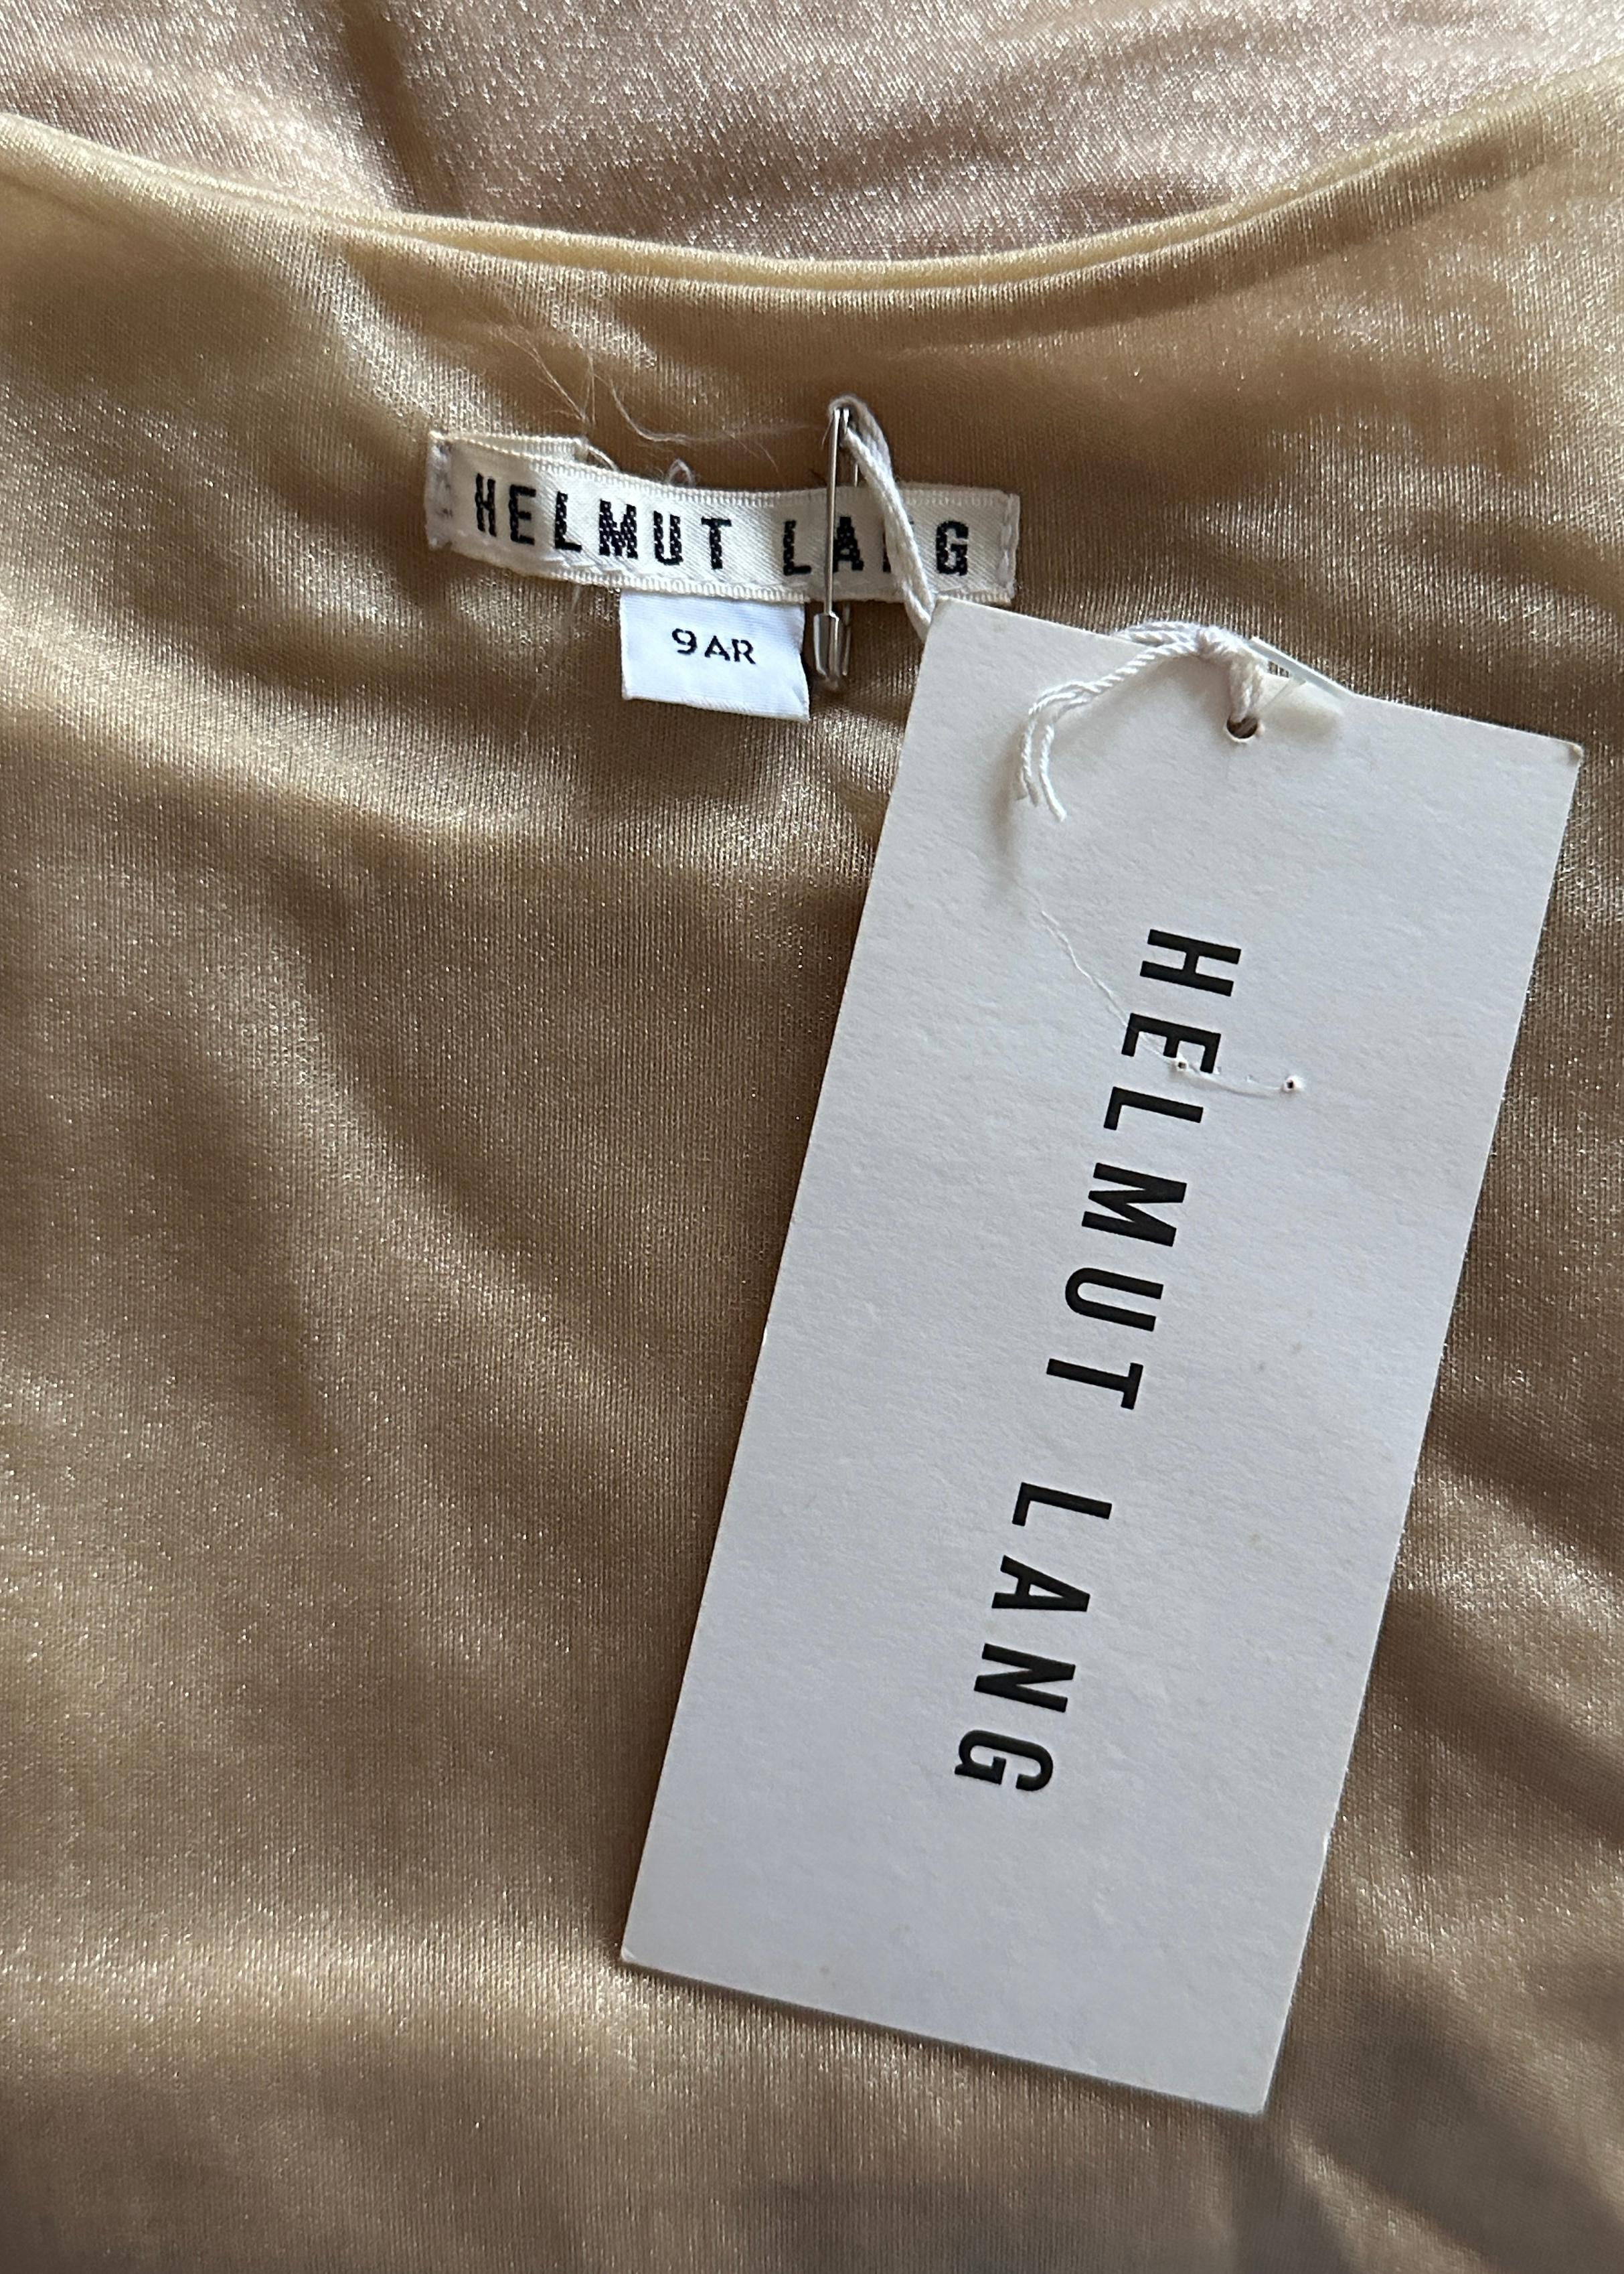 Helmut Lang Fall 1990 Runway Feather Trim Dress For Sale 3